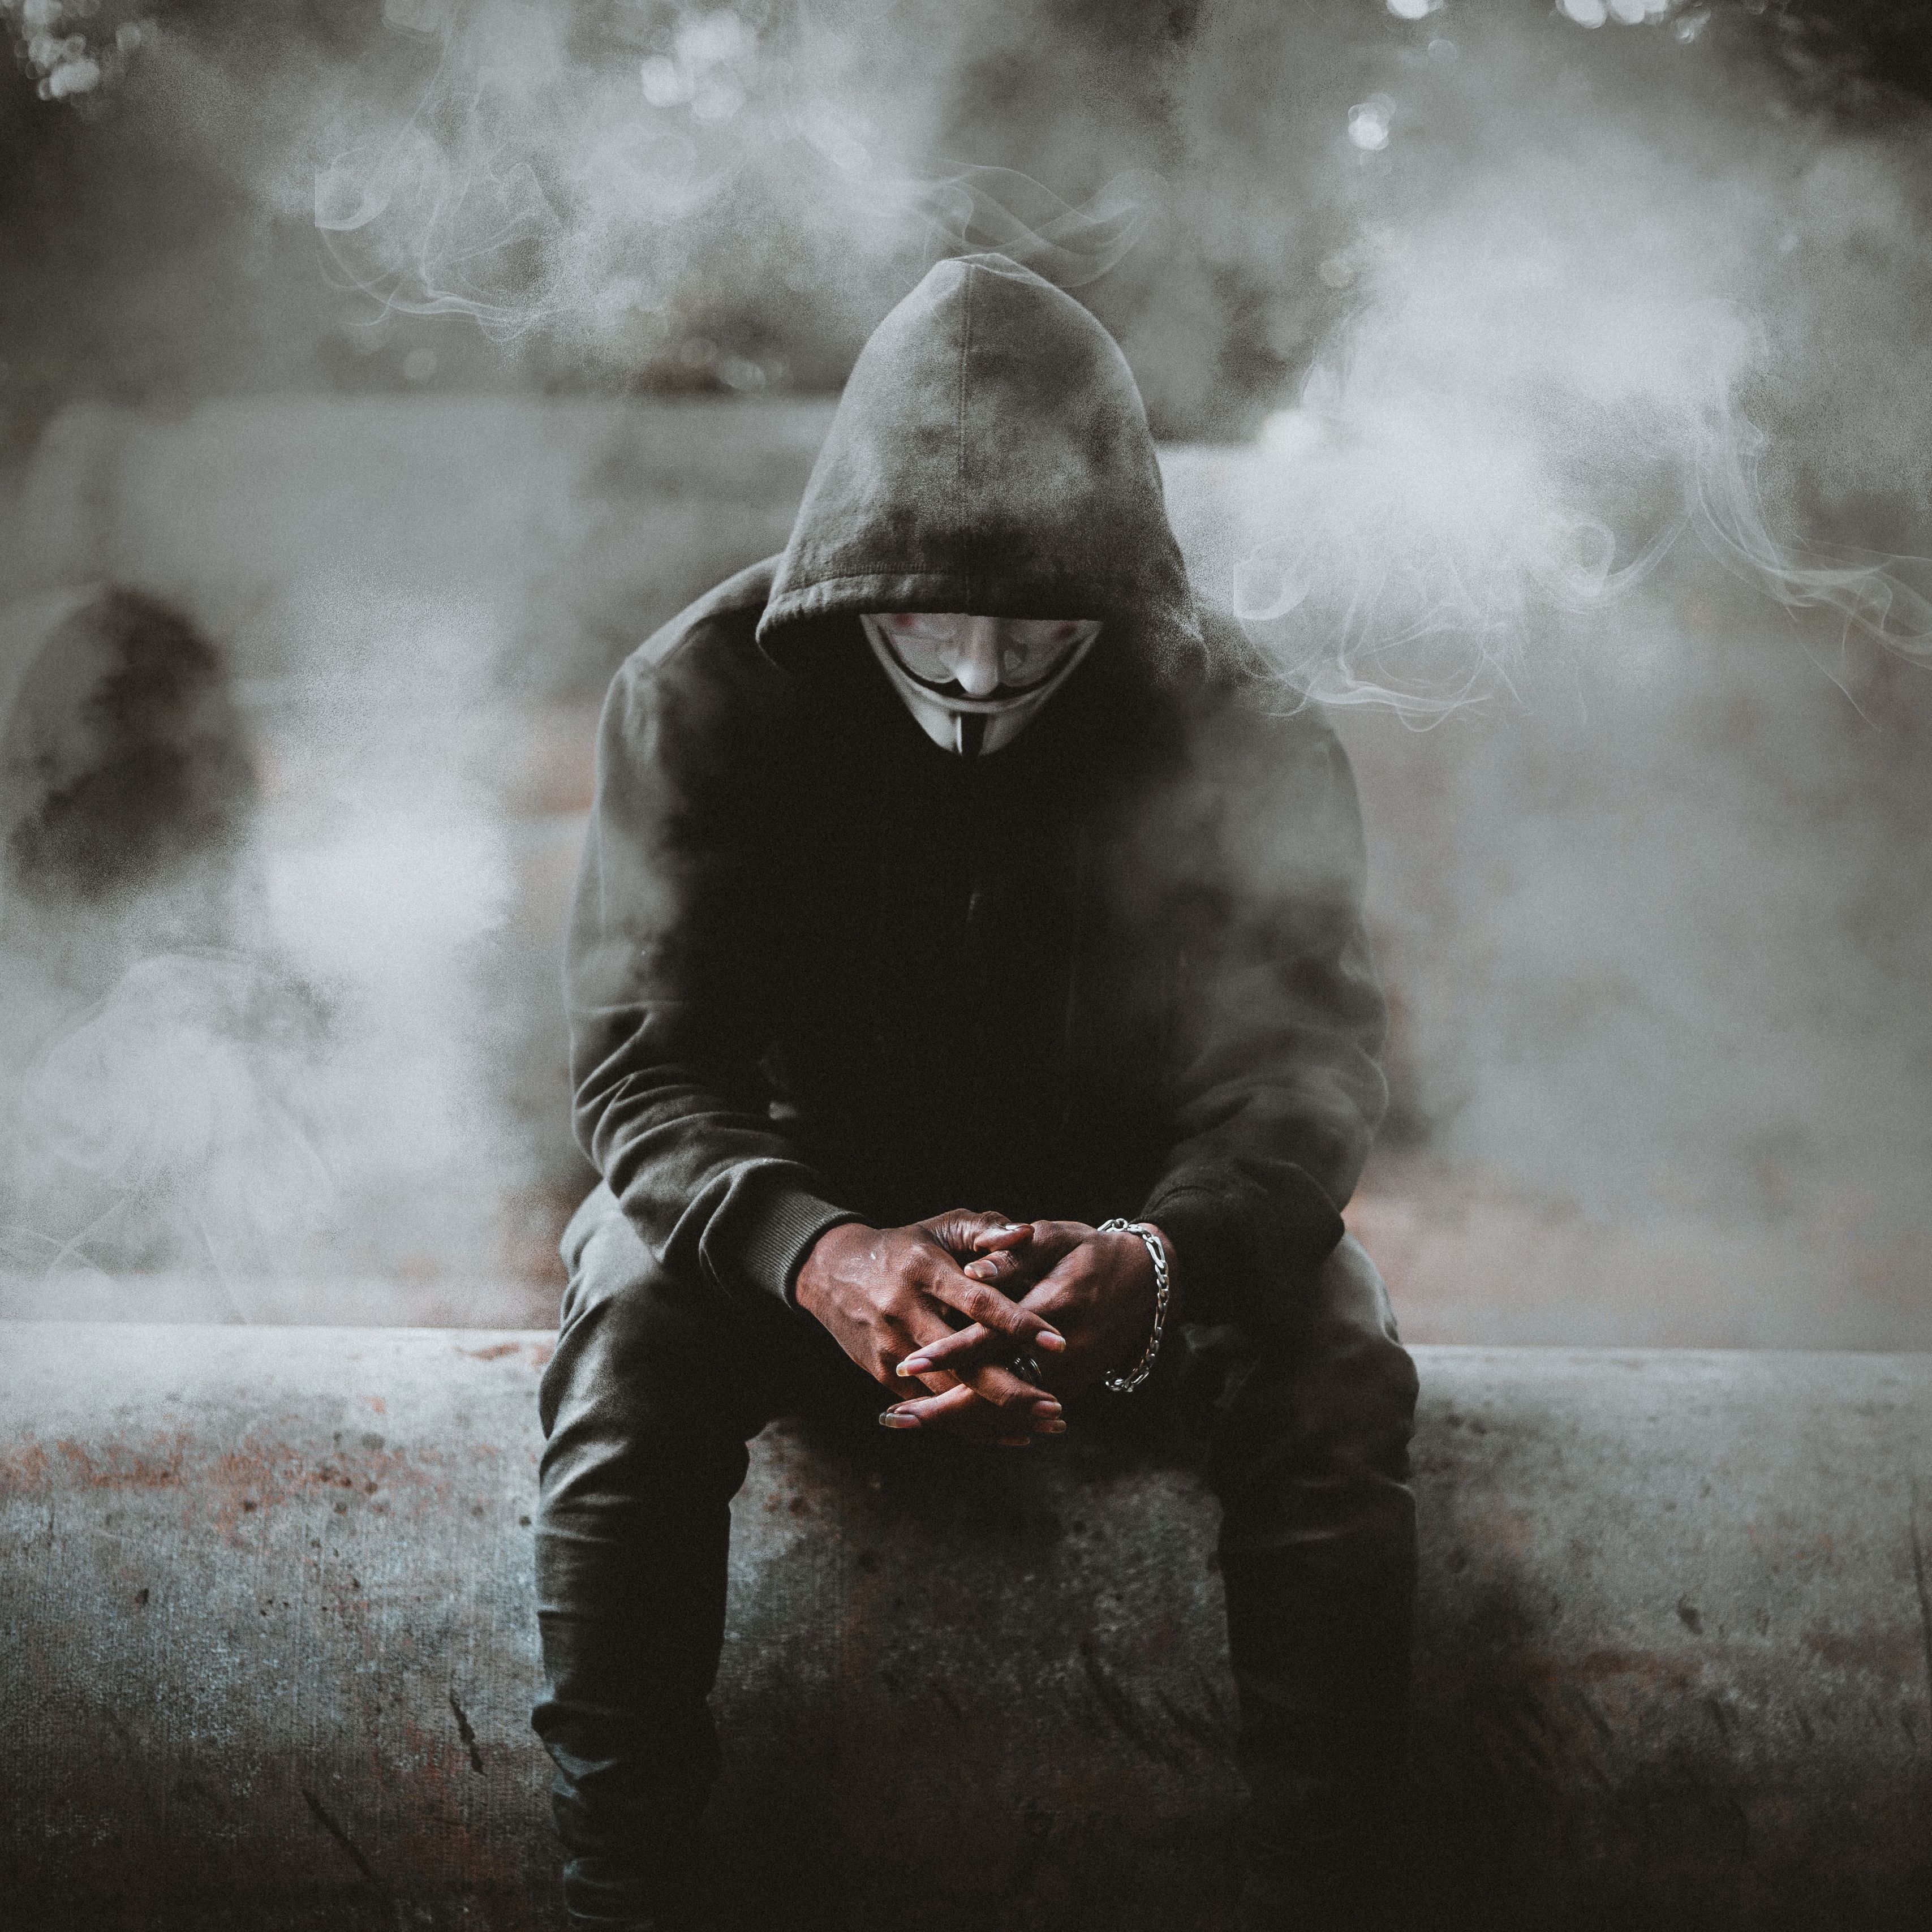 Download wallpaper 3415x3415 anonymous, mask, hood, smoke, person ipad pro 12.9 retina for parallax HD background